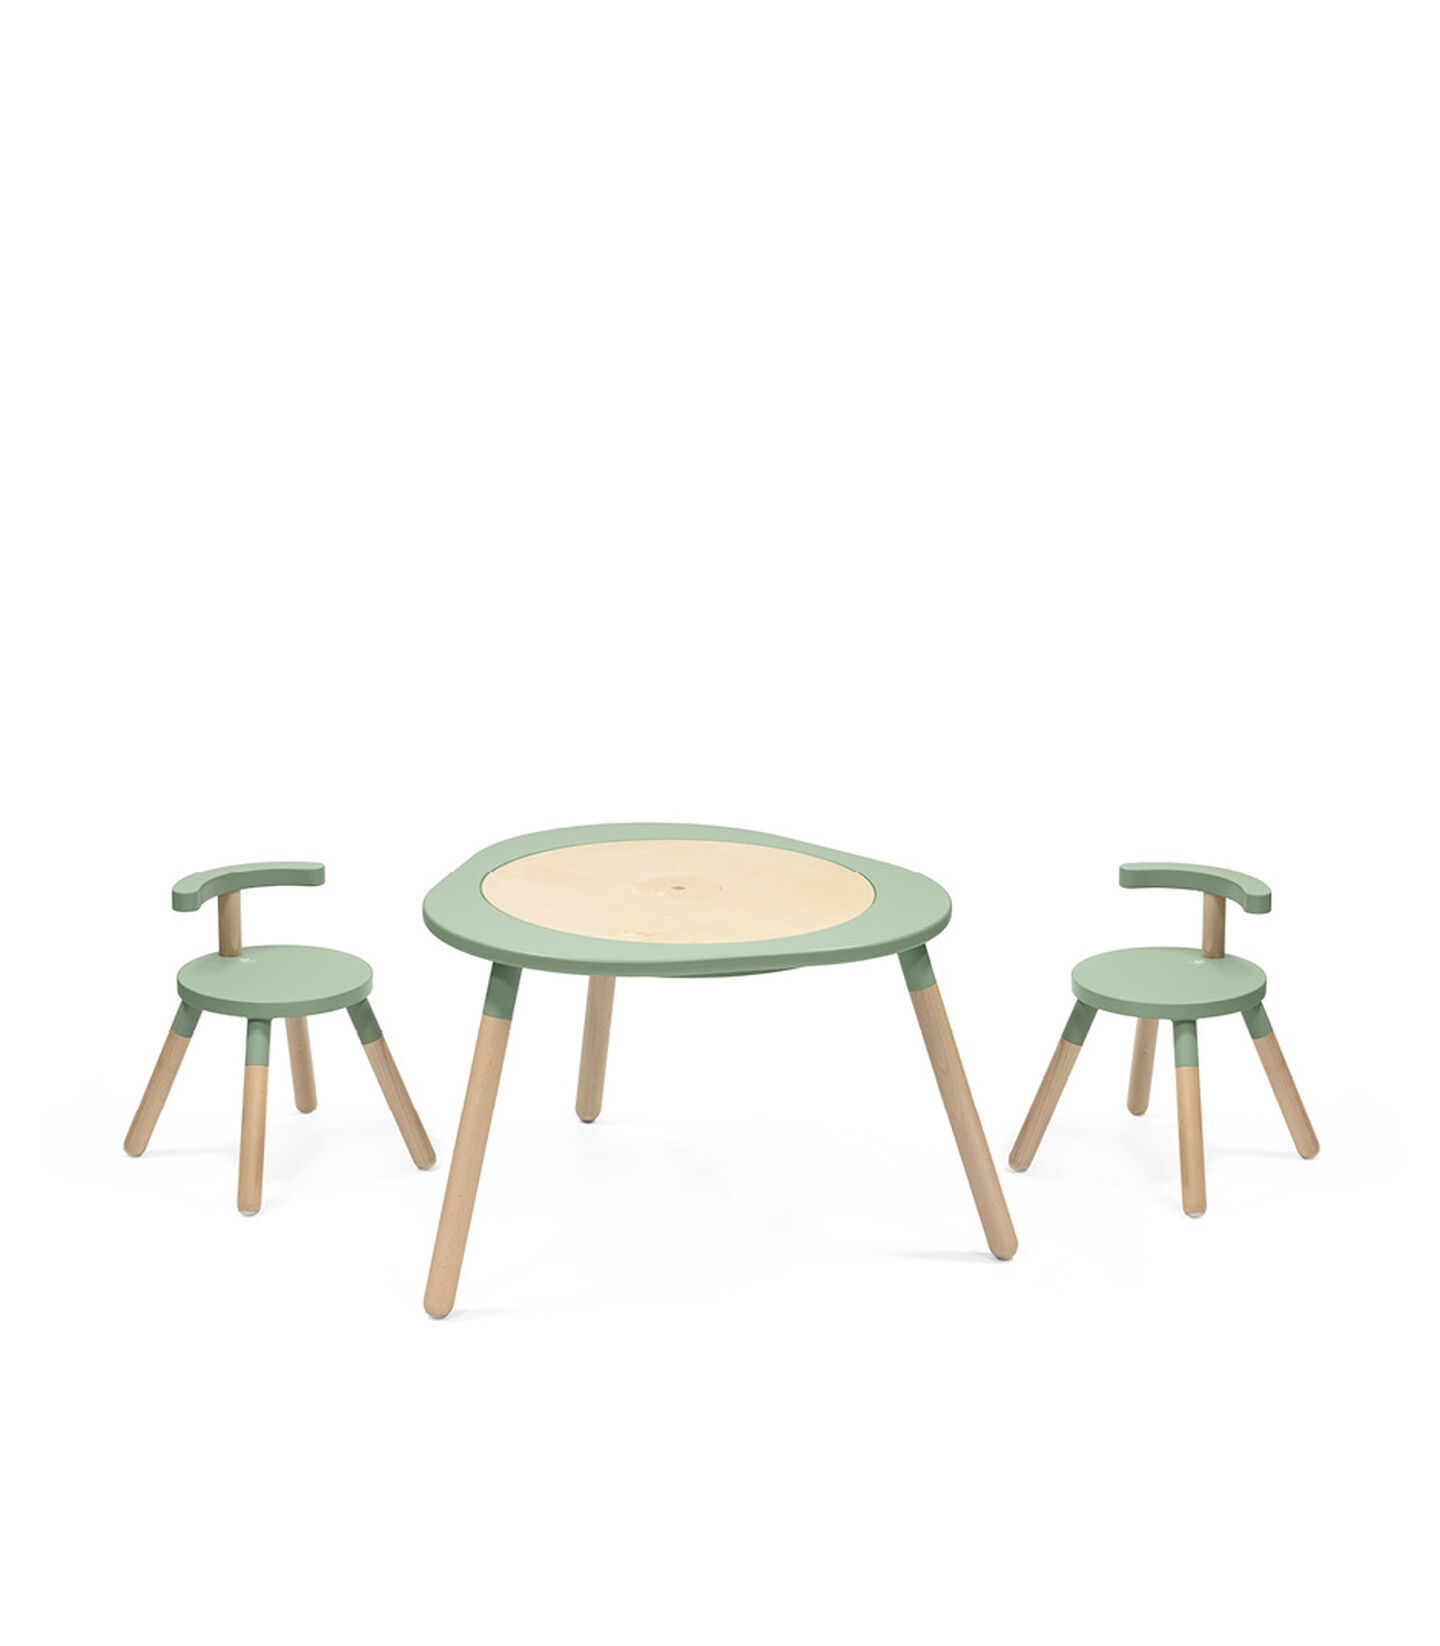 Stokke® MuTable™ Chair and Table C.over Green. Play Board. Bundle. incl two chairs. view 6